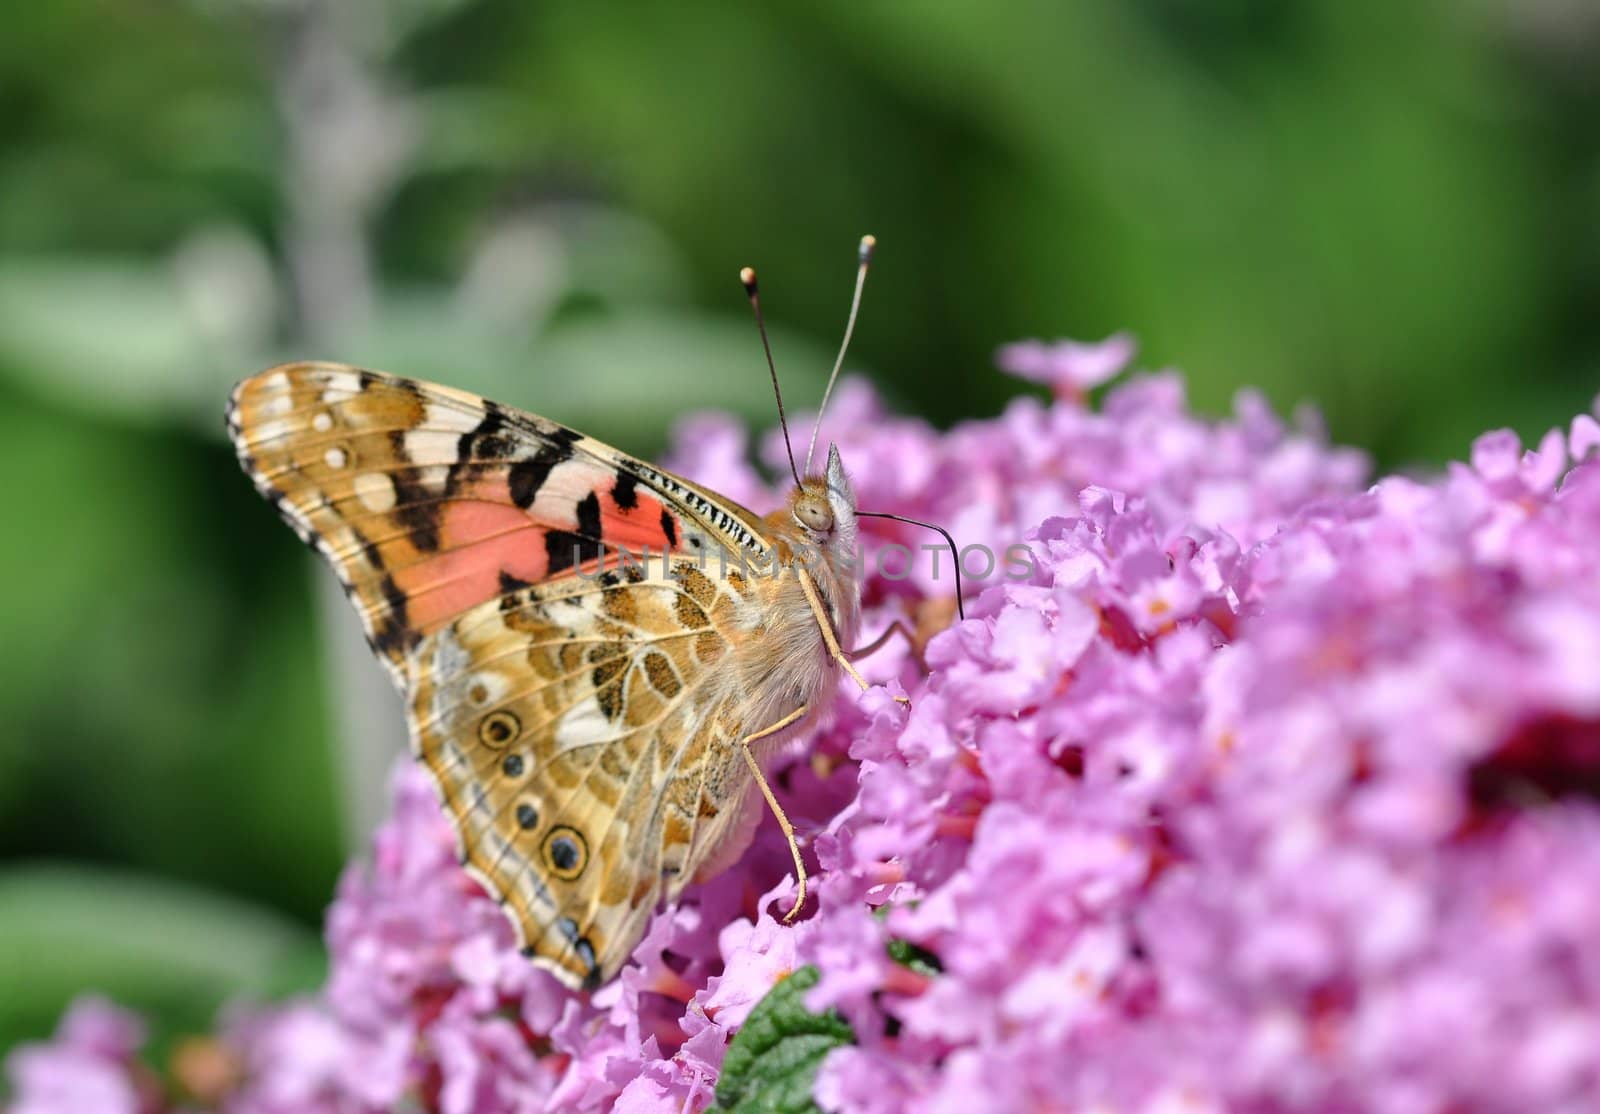 A butterfly on Lilac flower.